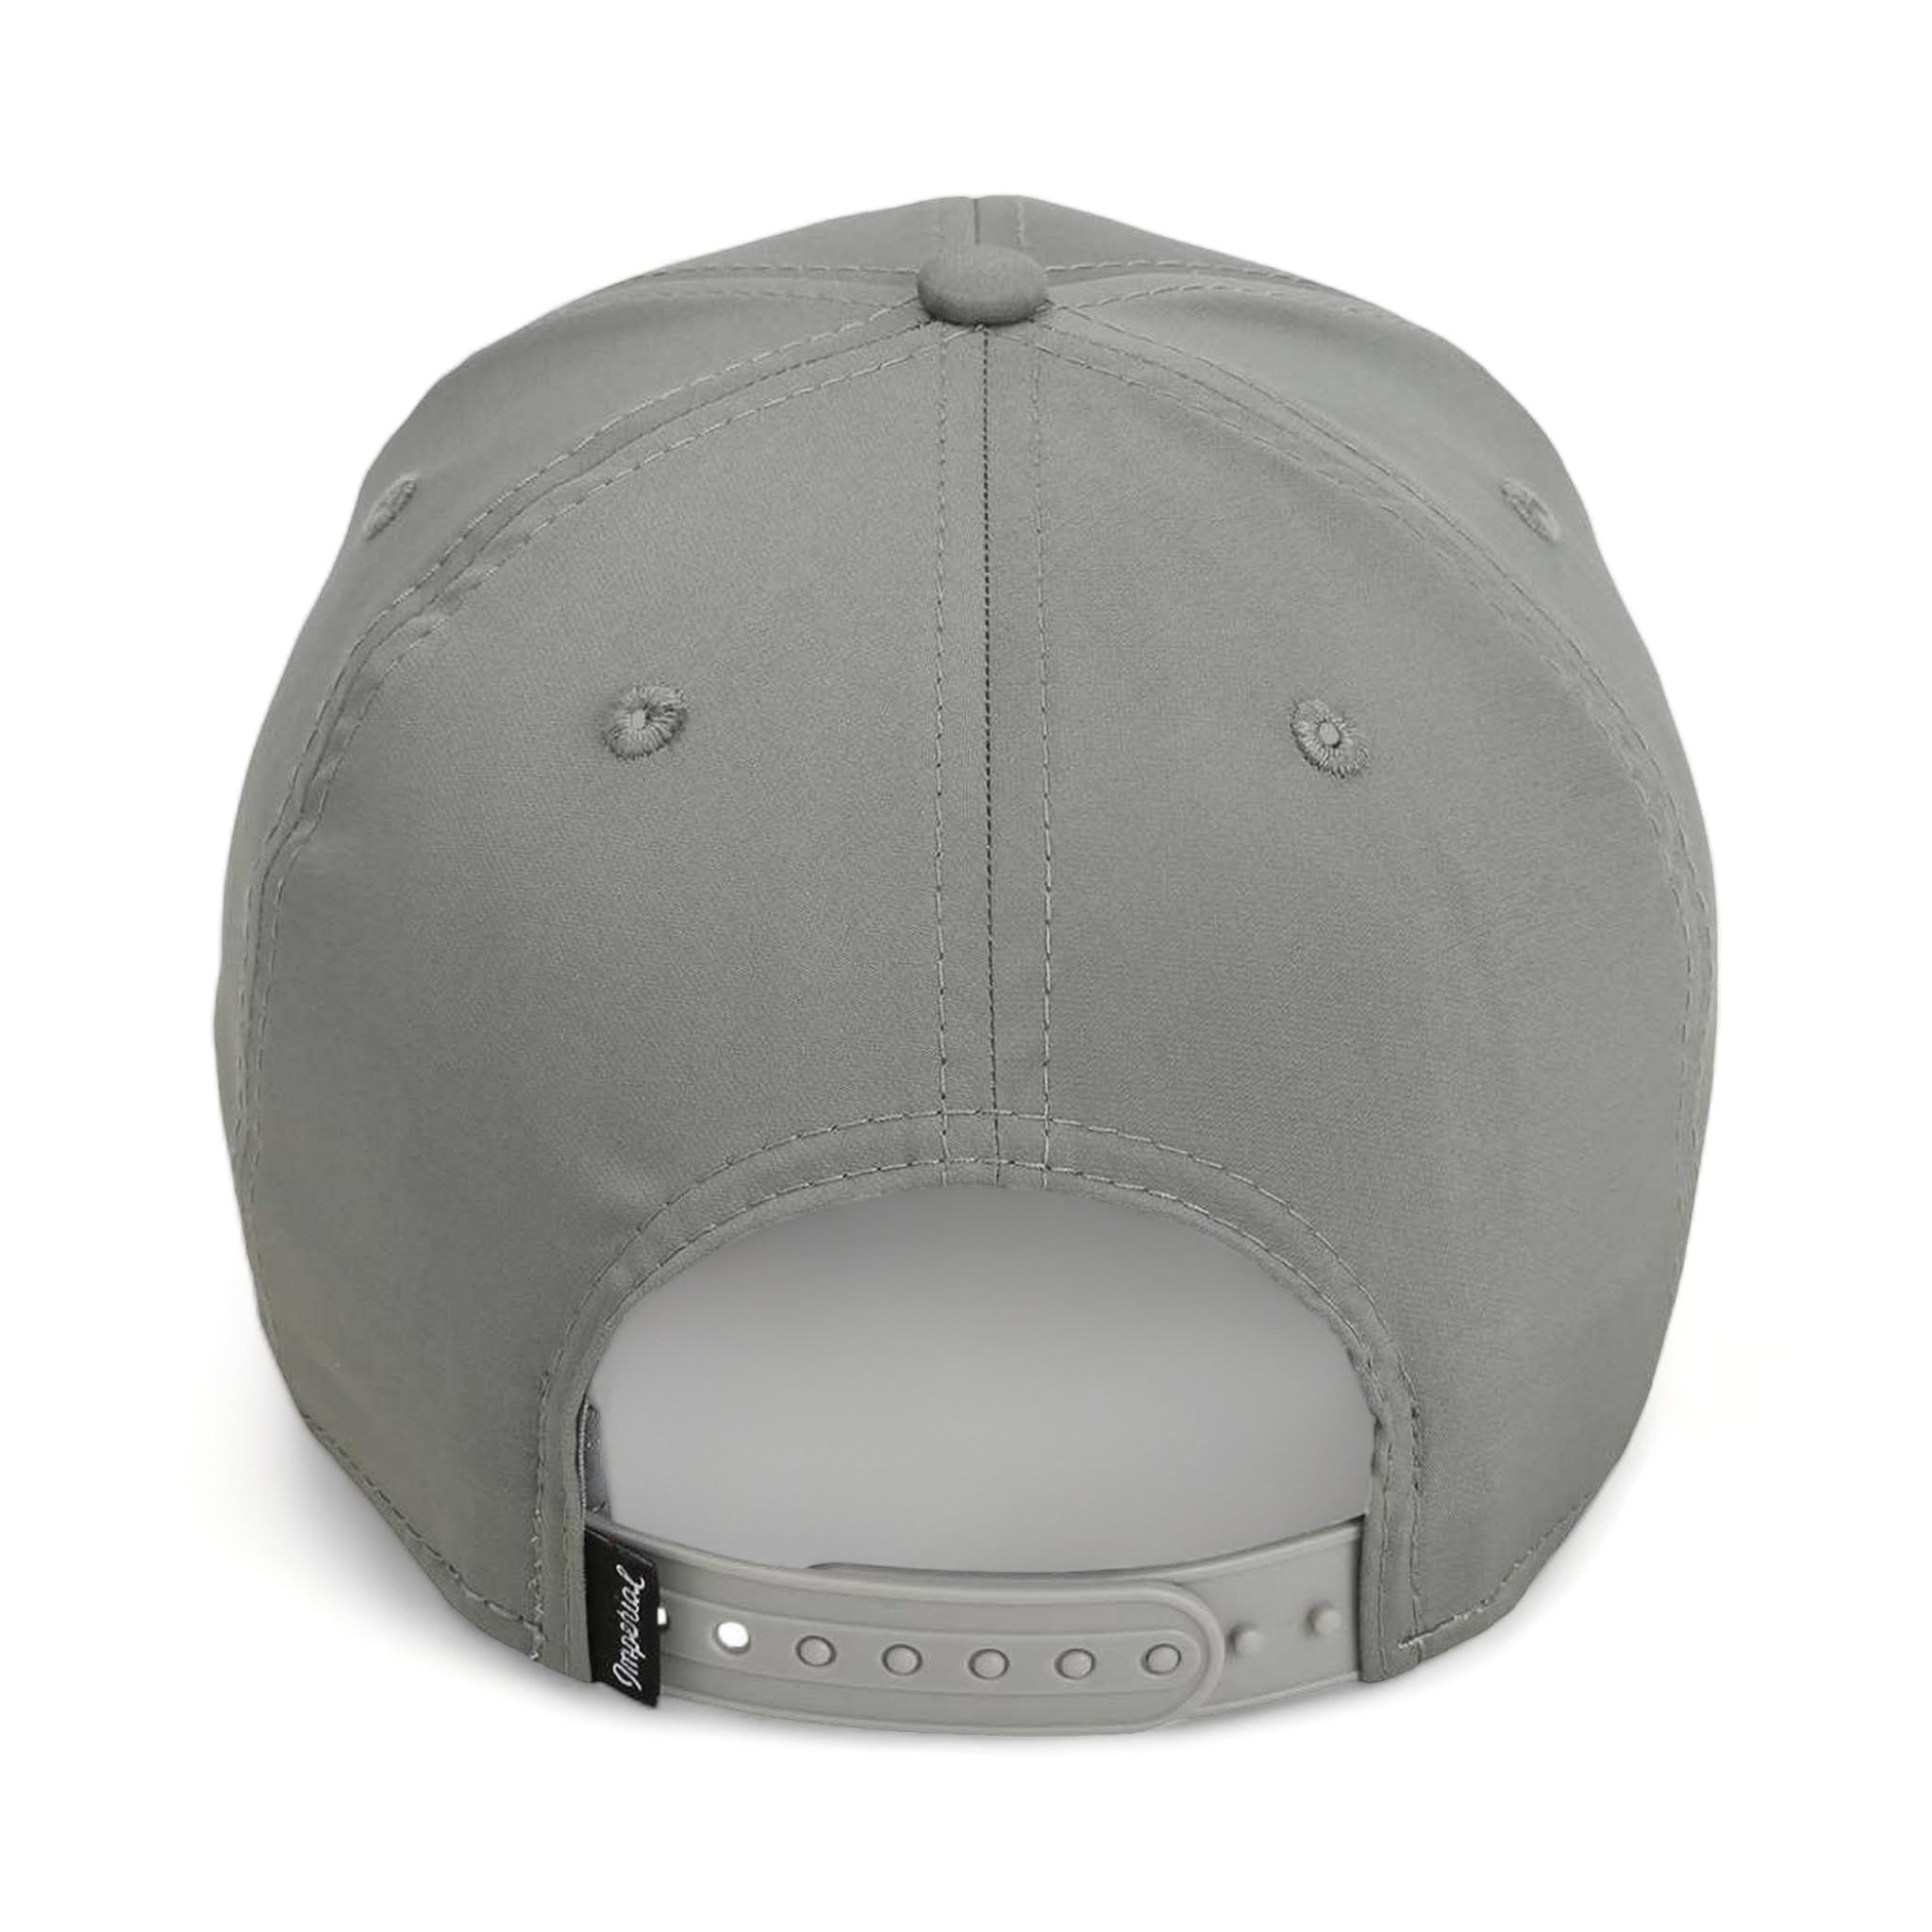 Back view of Imperial 7054 custom hat in grey and black